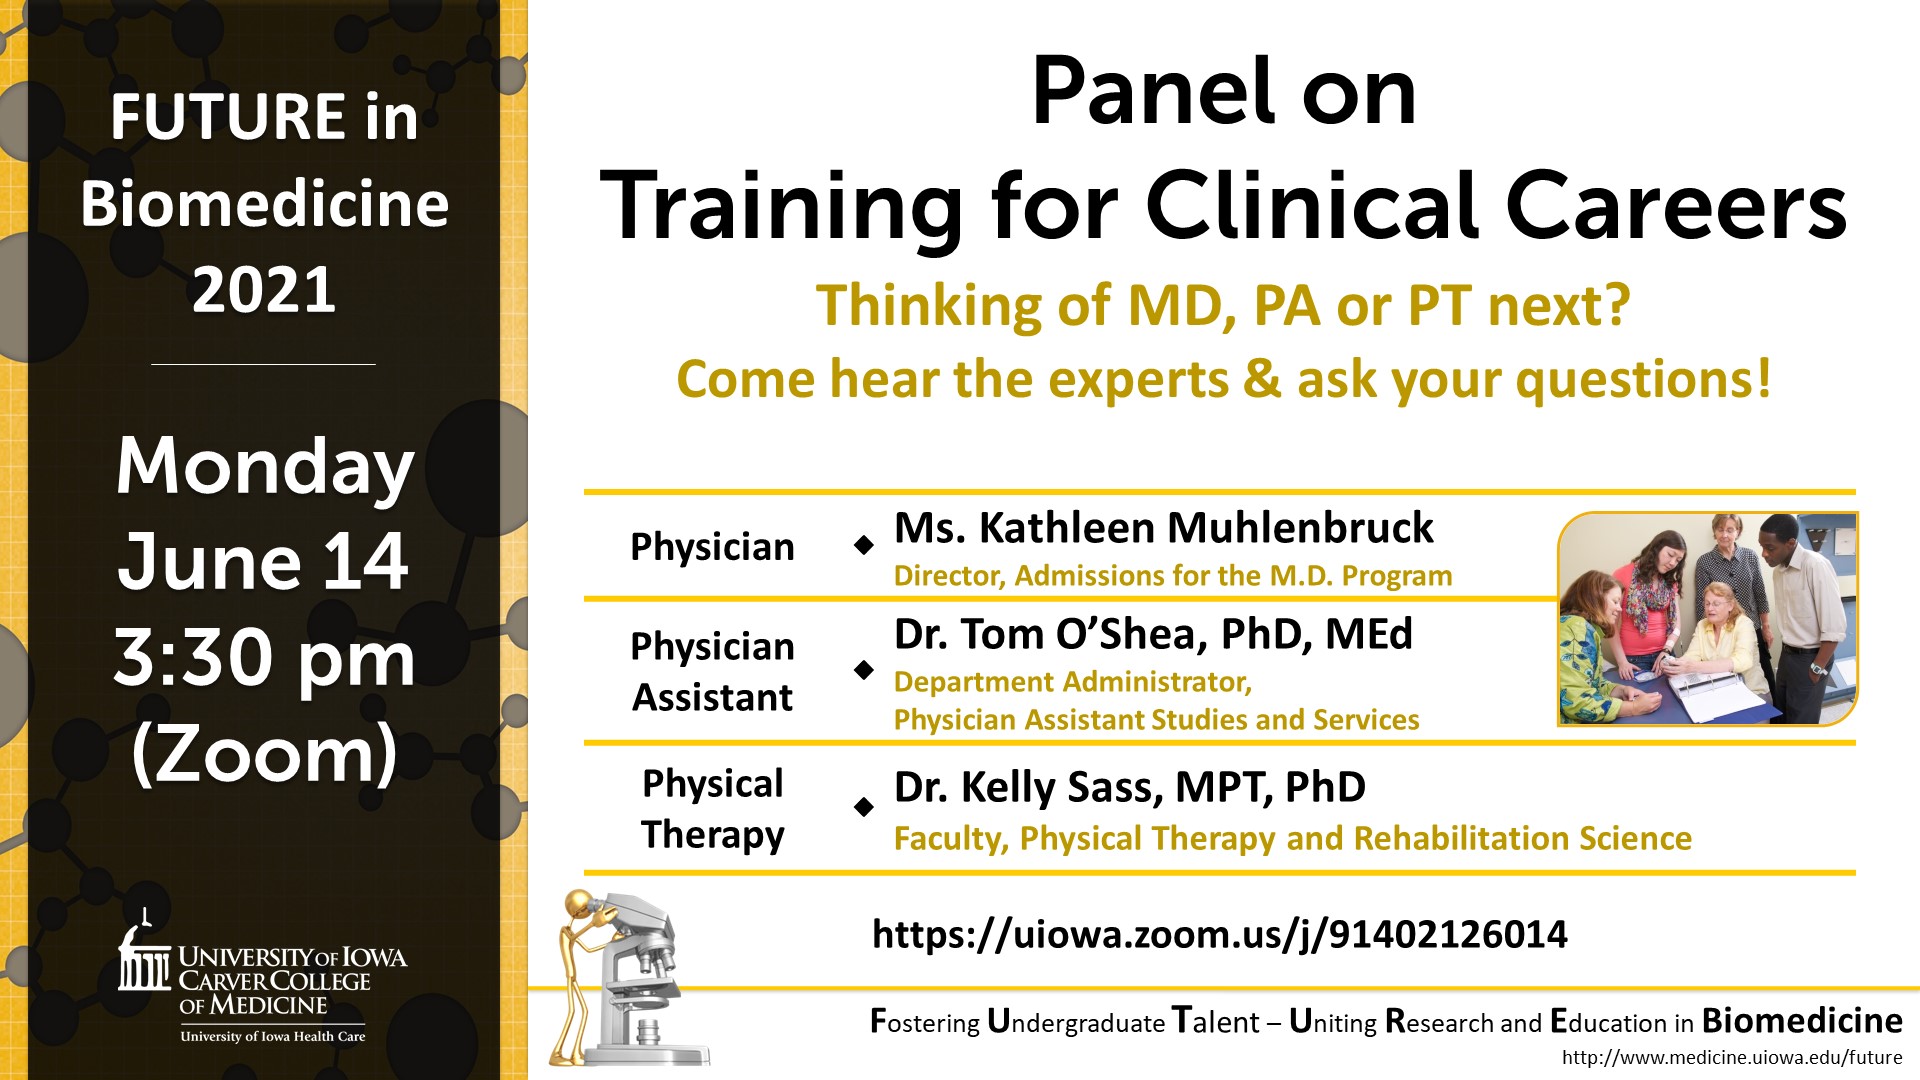 FUTURE in Biomedicine Panel on Clinical Careers training at Iowa, June 14